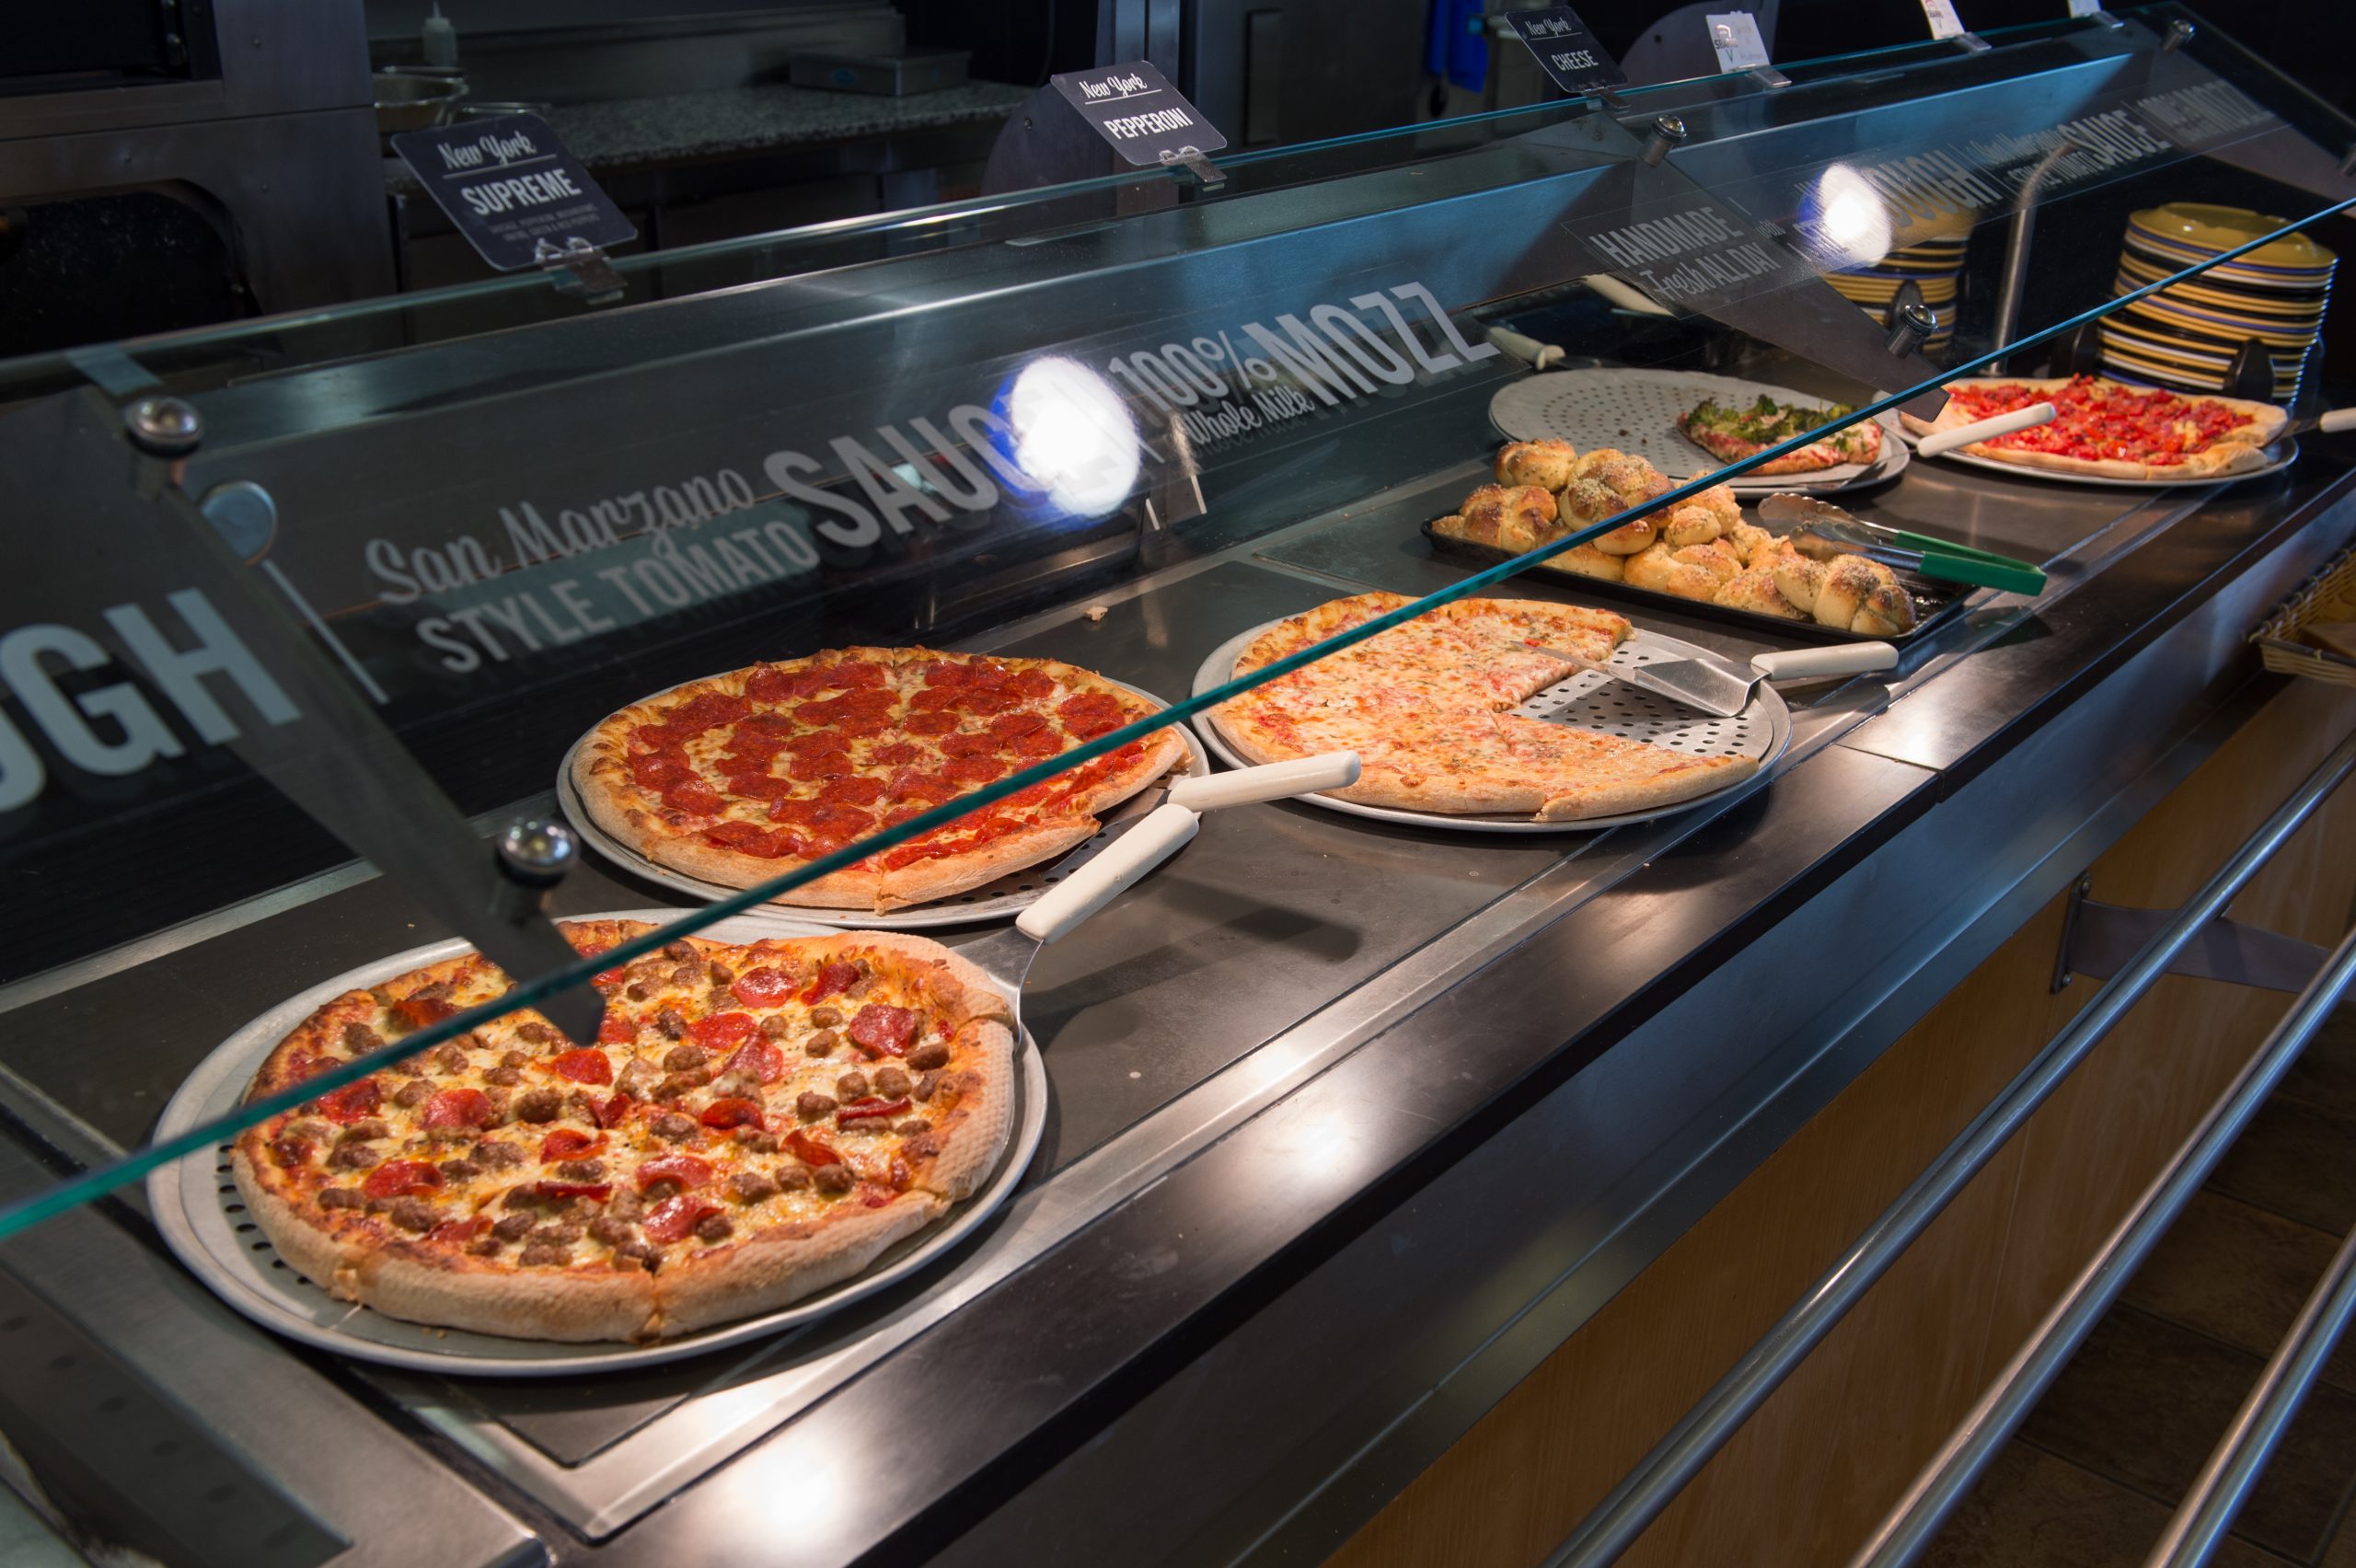 Several types of pizza with a variety of toppings at one of the dining halls.